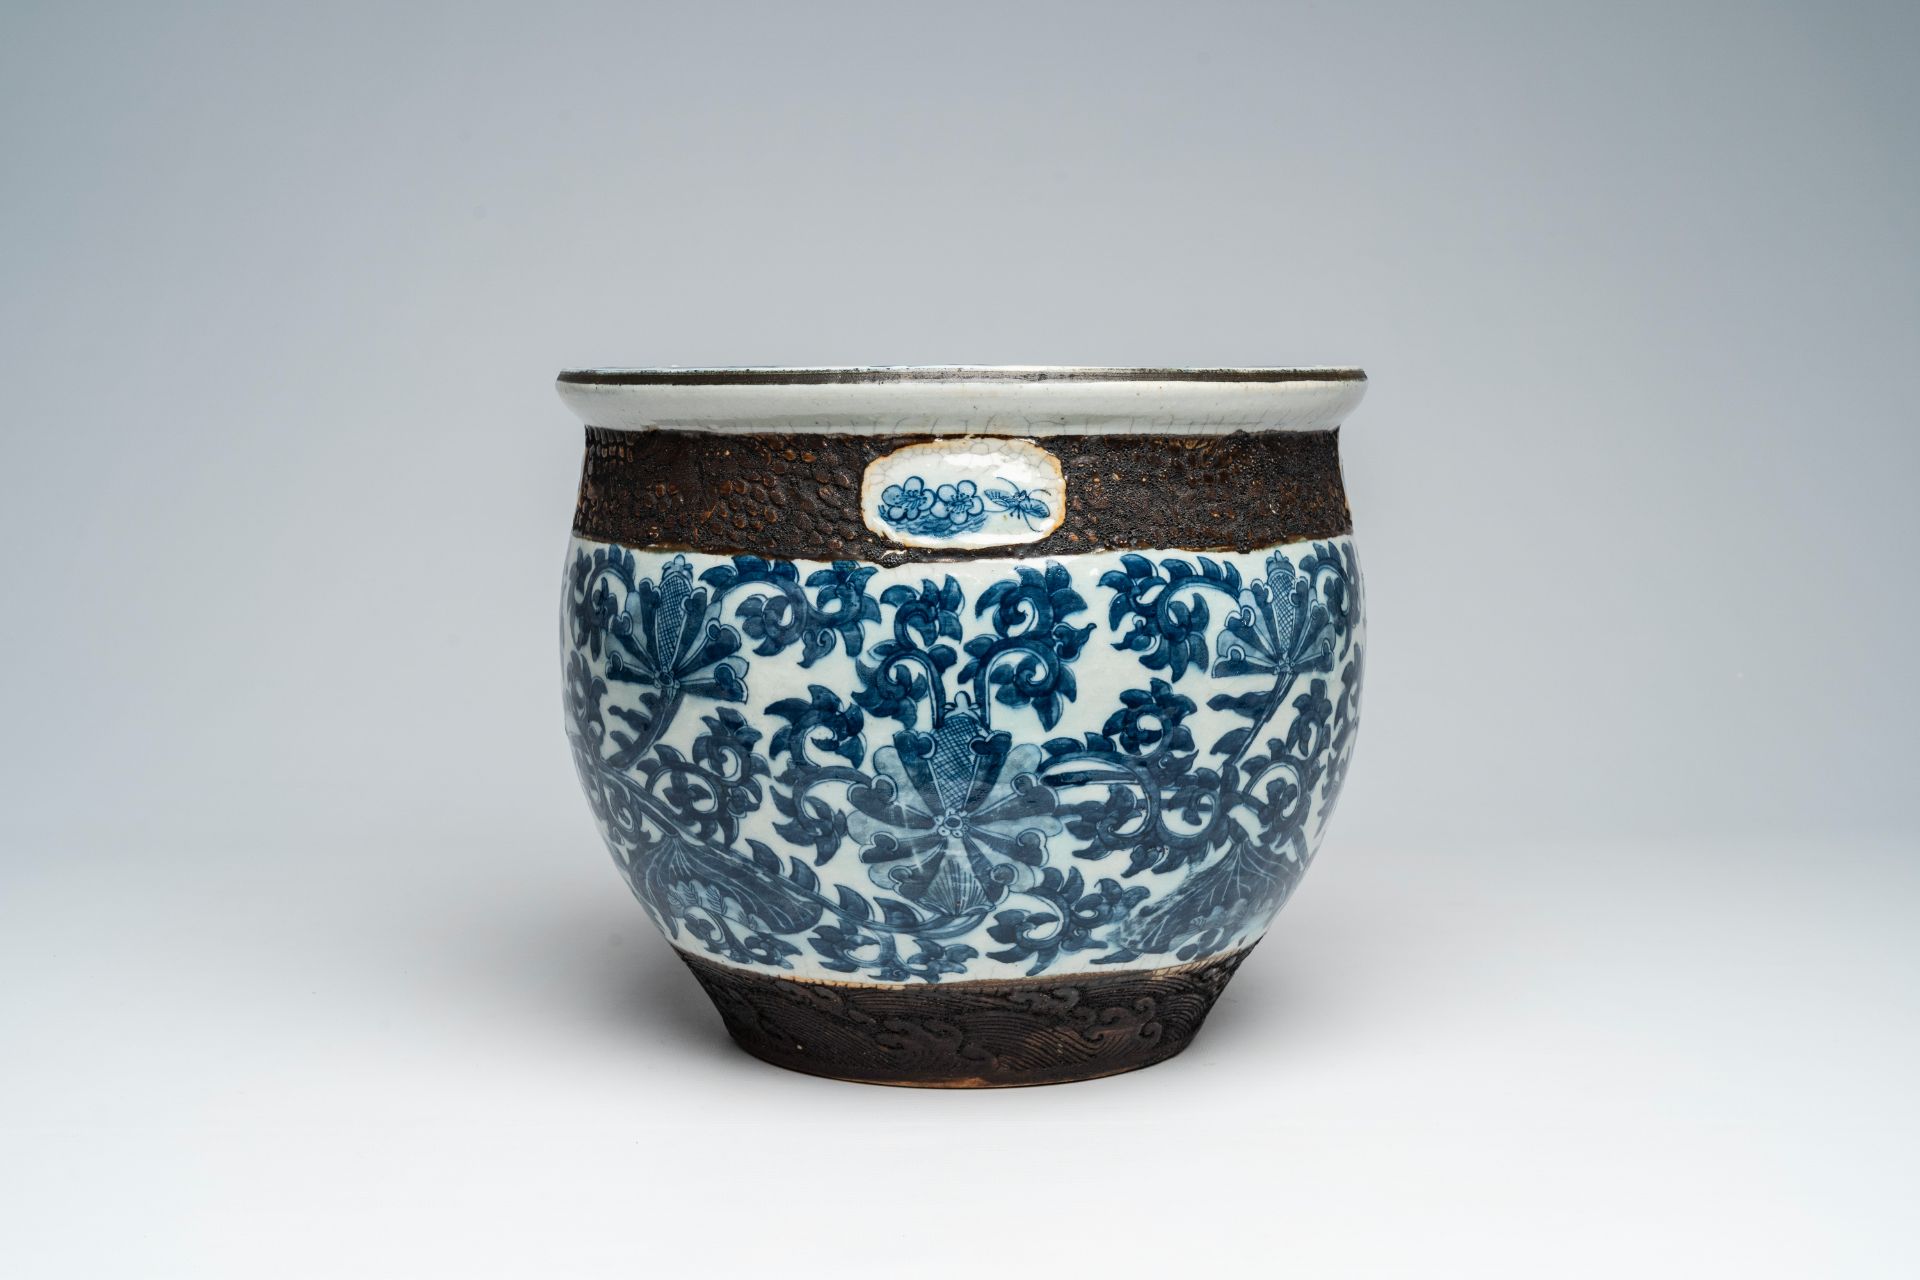 A Chinese Nanking craquelÃ© blue and white jardiniÃ¨re with floral design, 19th C. - Image 4 of 7